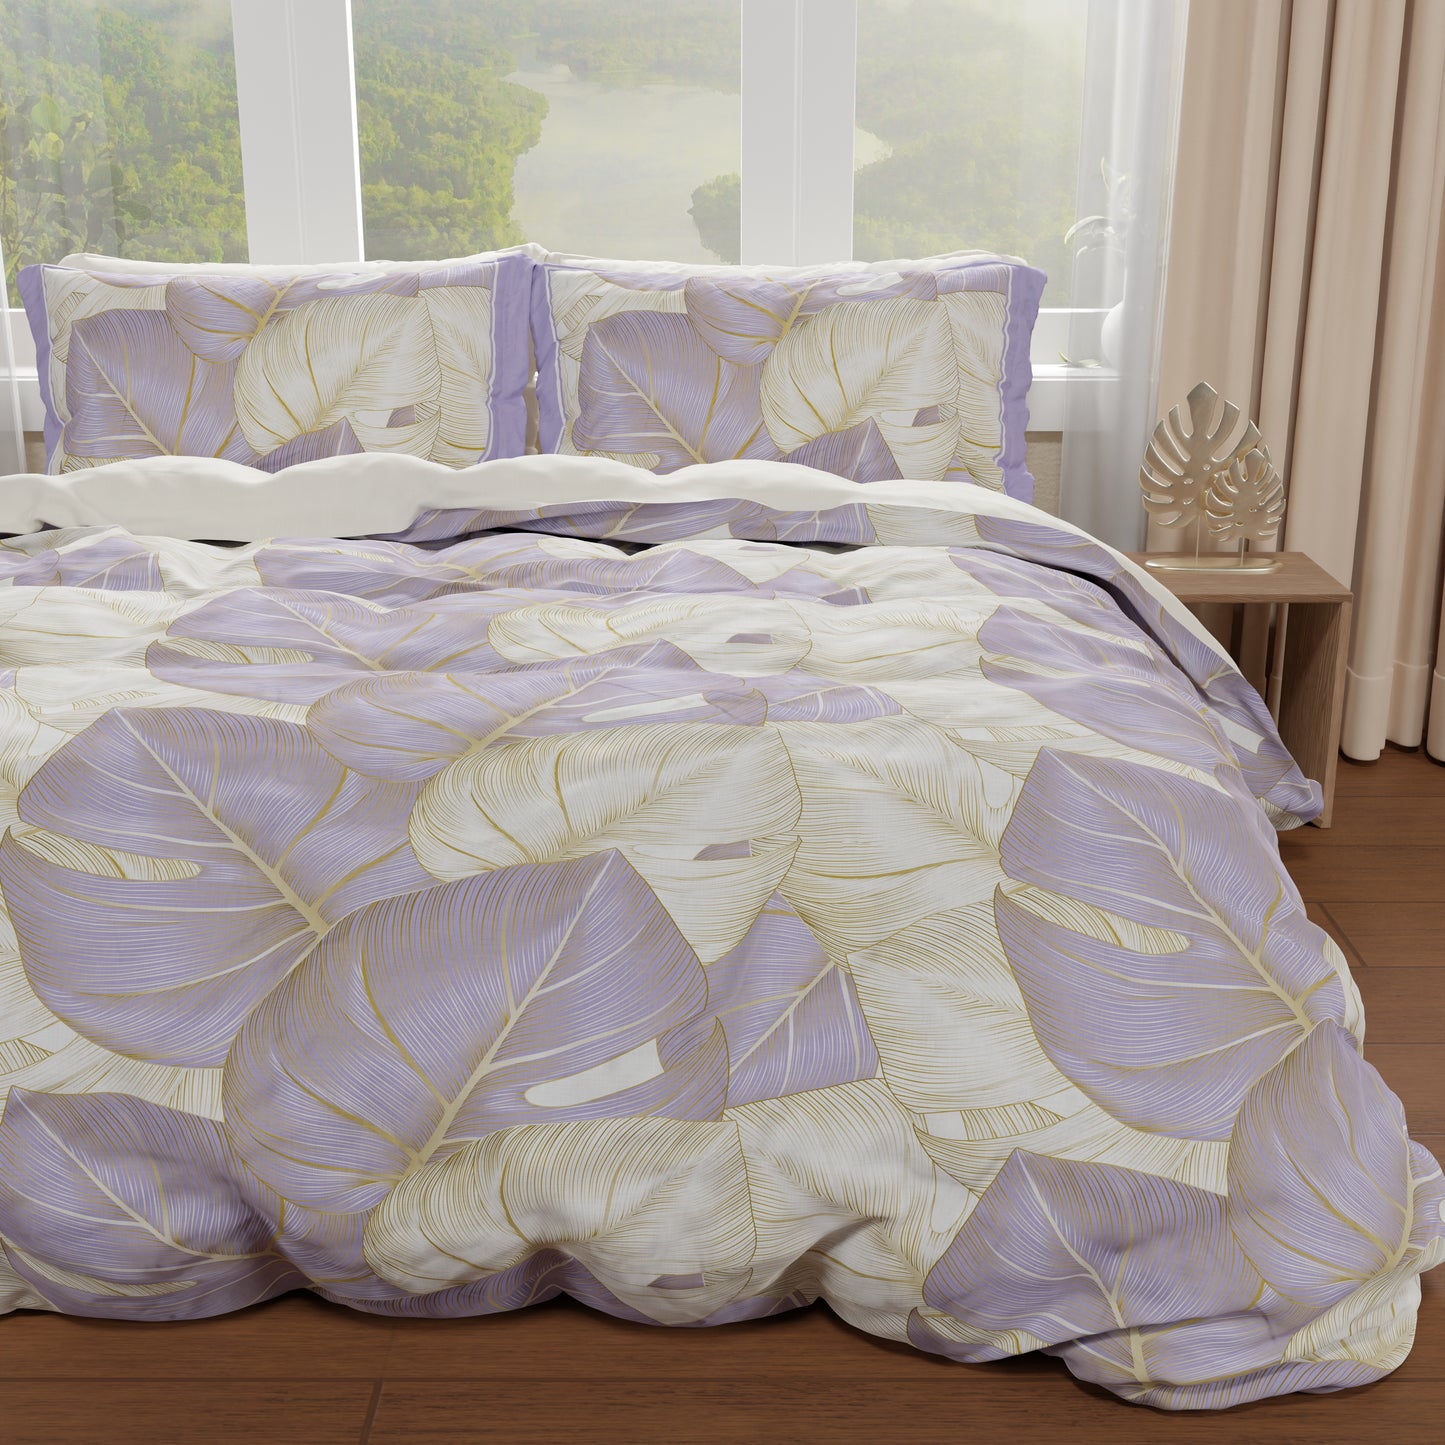 Double, Single, Queen and Half Duvet Cover, Tropical Lilla Gold